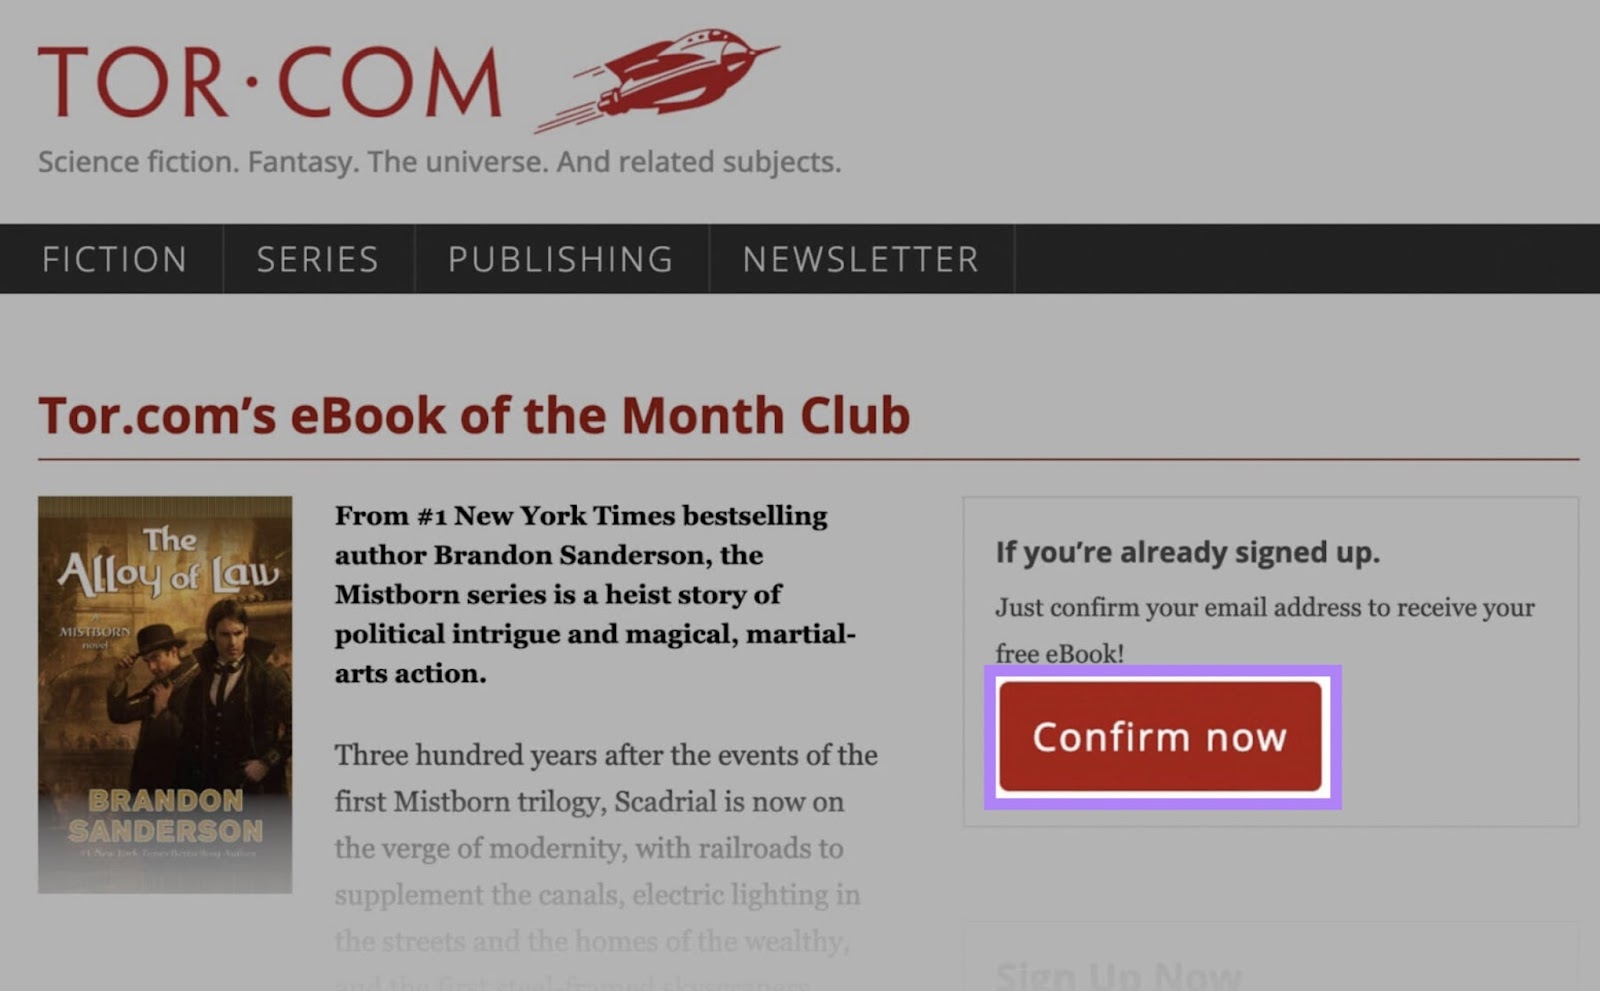 Tor books landing page CTA highlighted to confirm receiving a free eBook